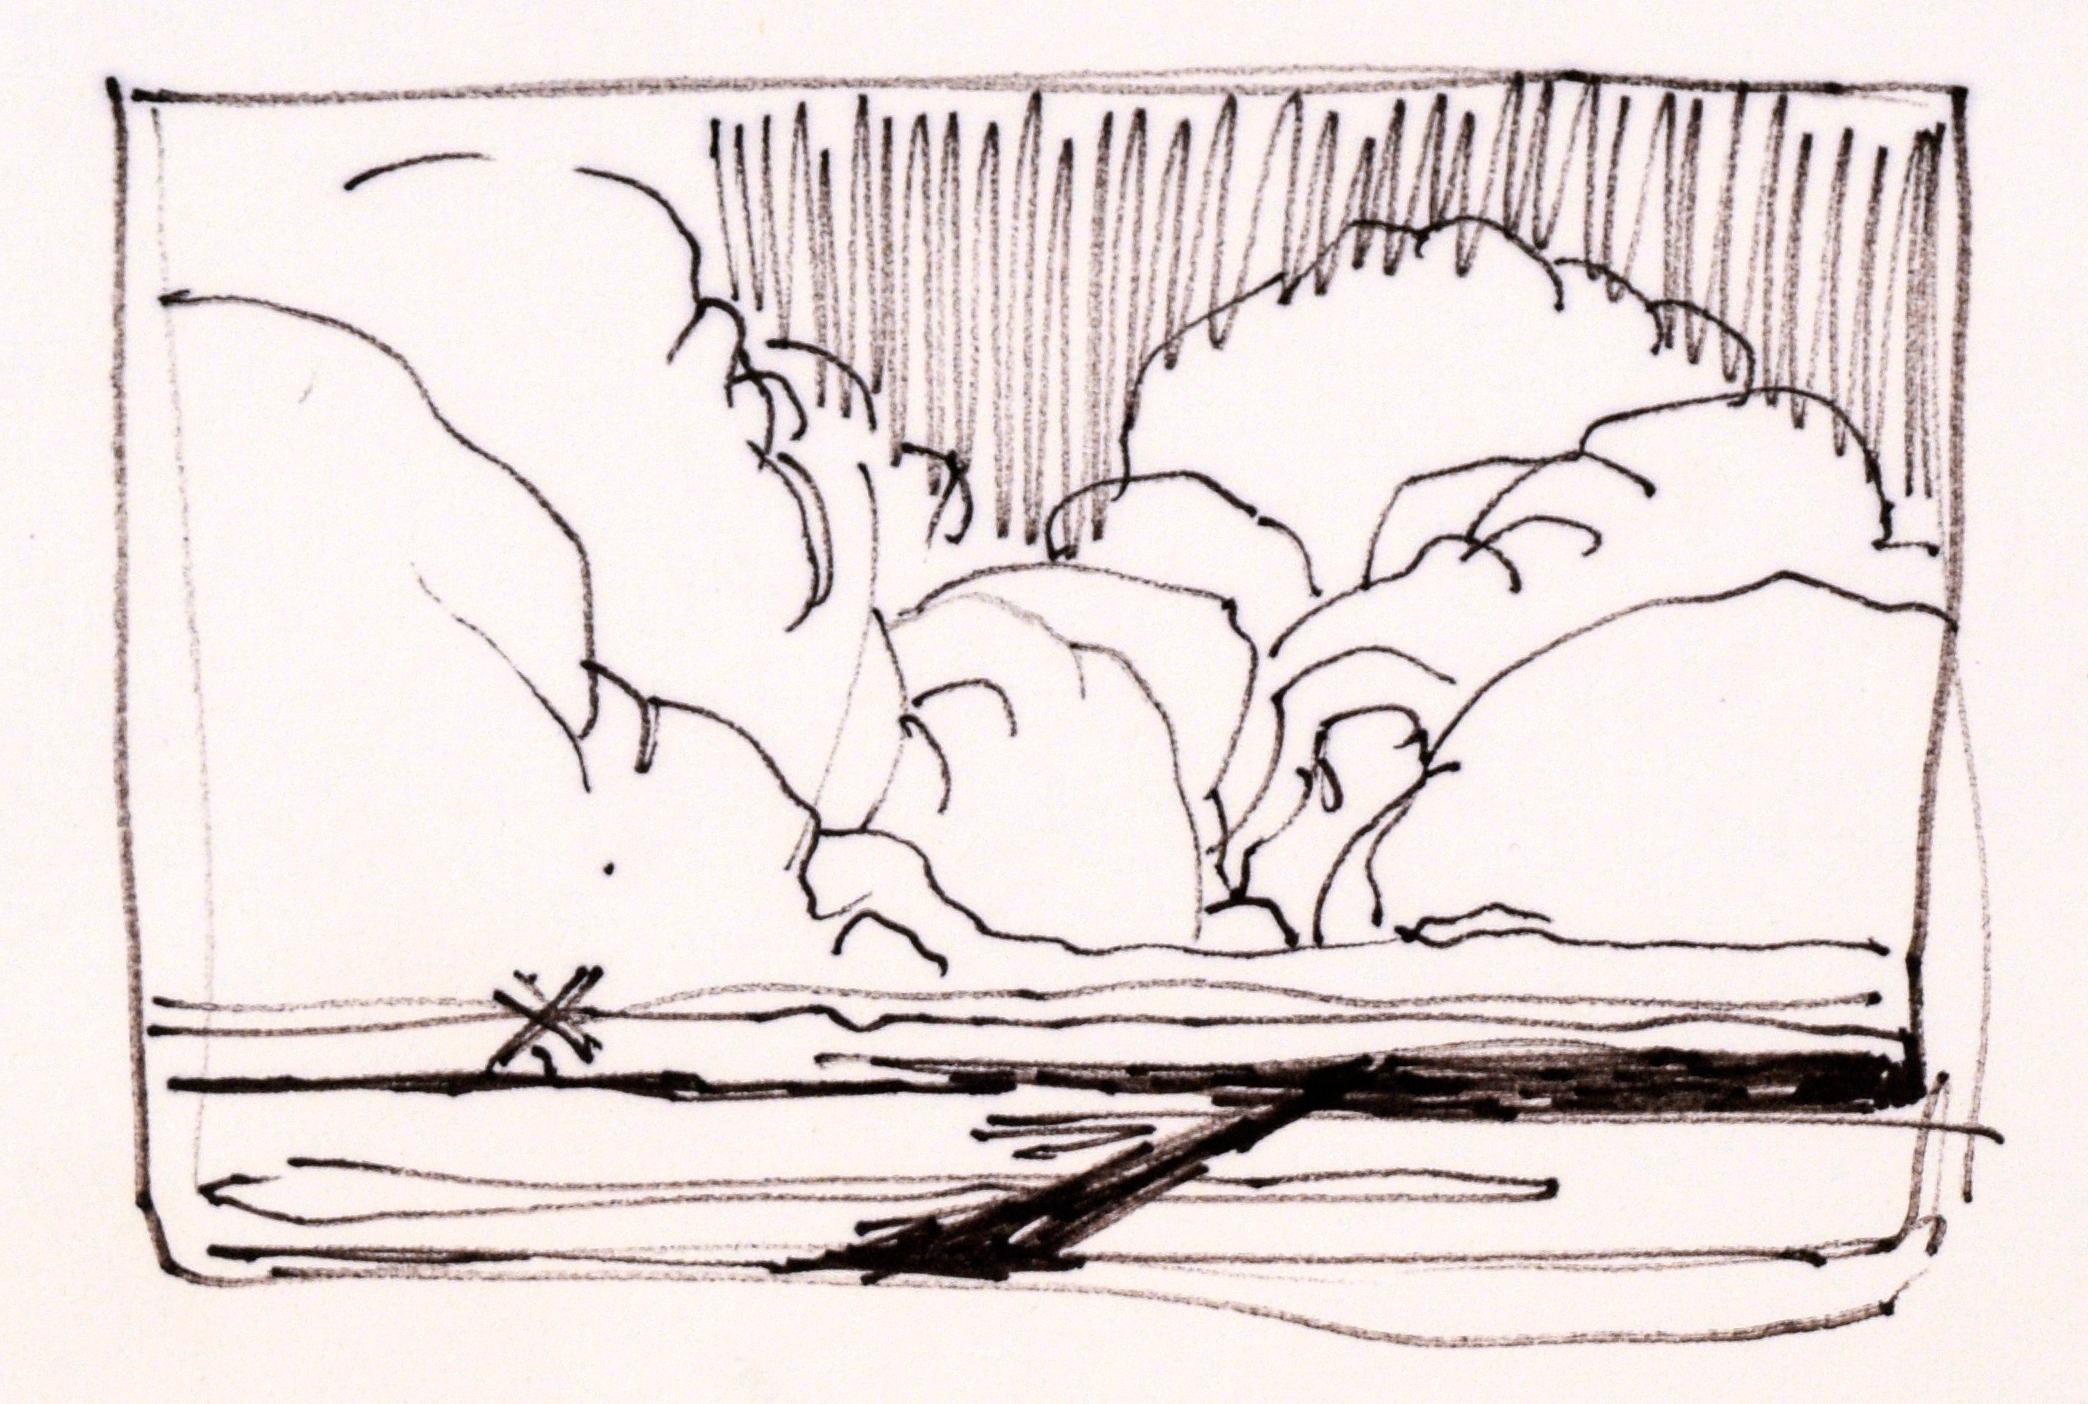 Six-Panel Thumbnail Sketches of Desert and Canyon Landscapes in Ink on Paper

Collection of landscape line drawings by listed Maine artist Laurence Sisson (American, 1928-2015). Six panels of preparatory drawings for landscape paintings are laid out